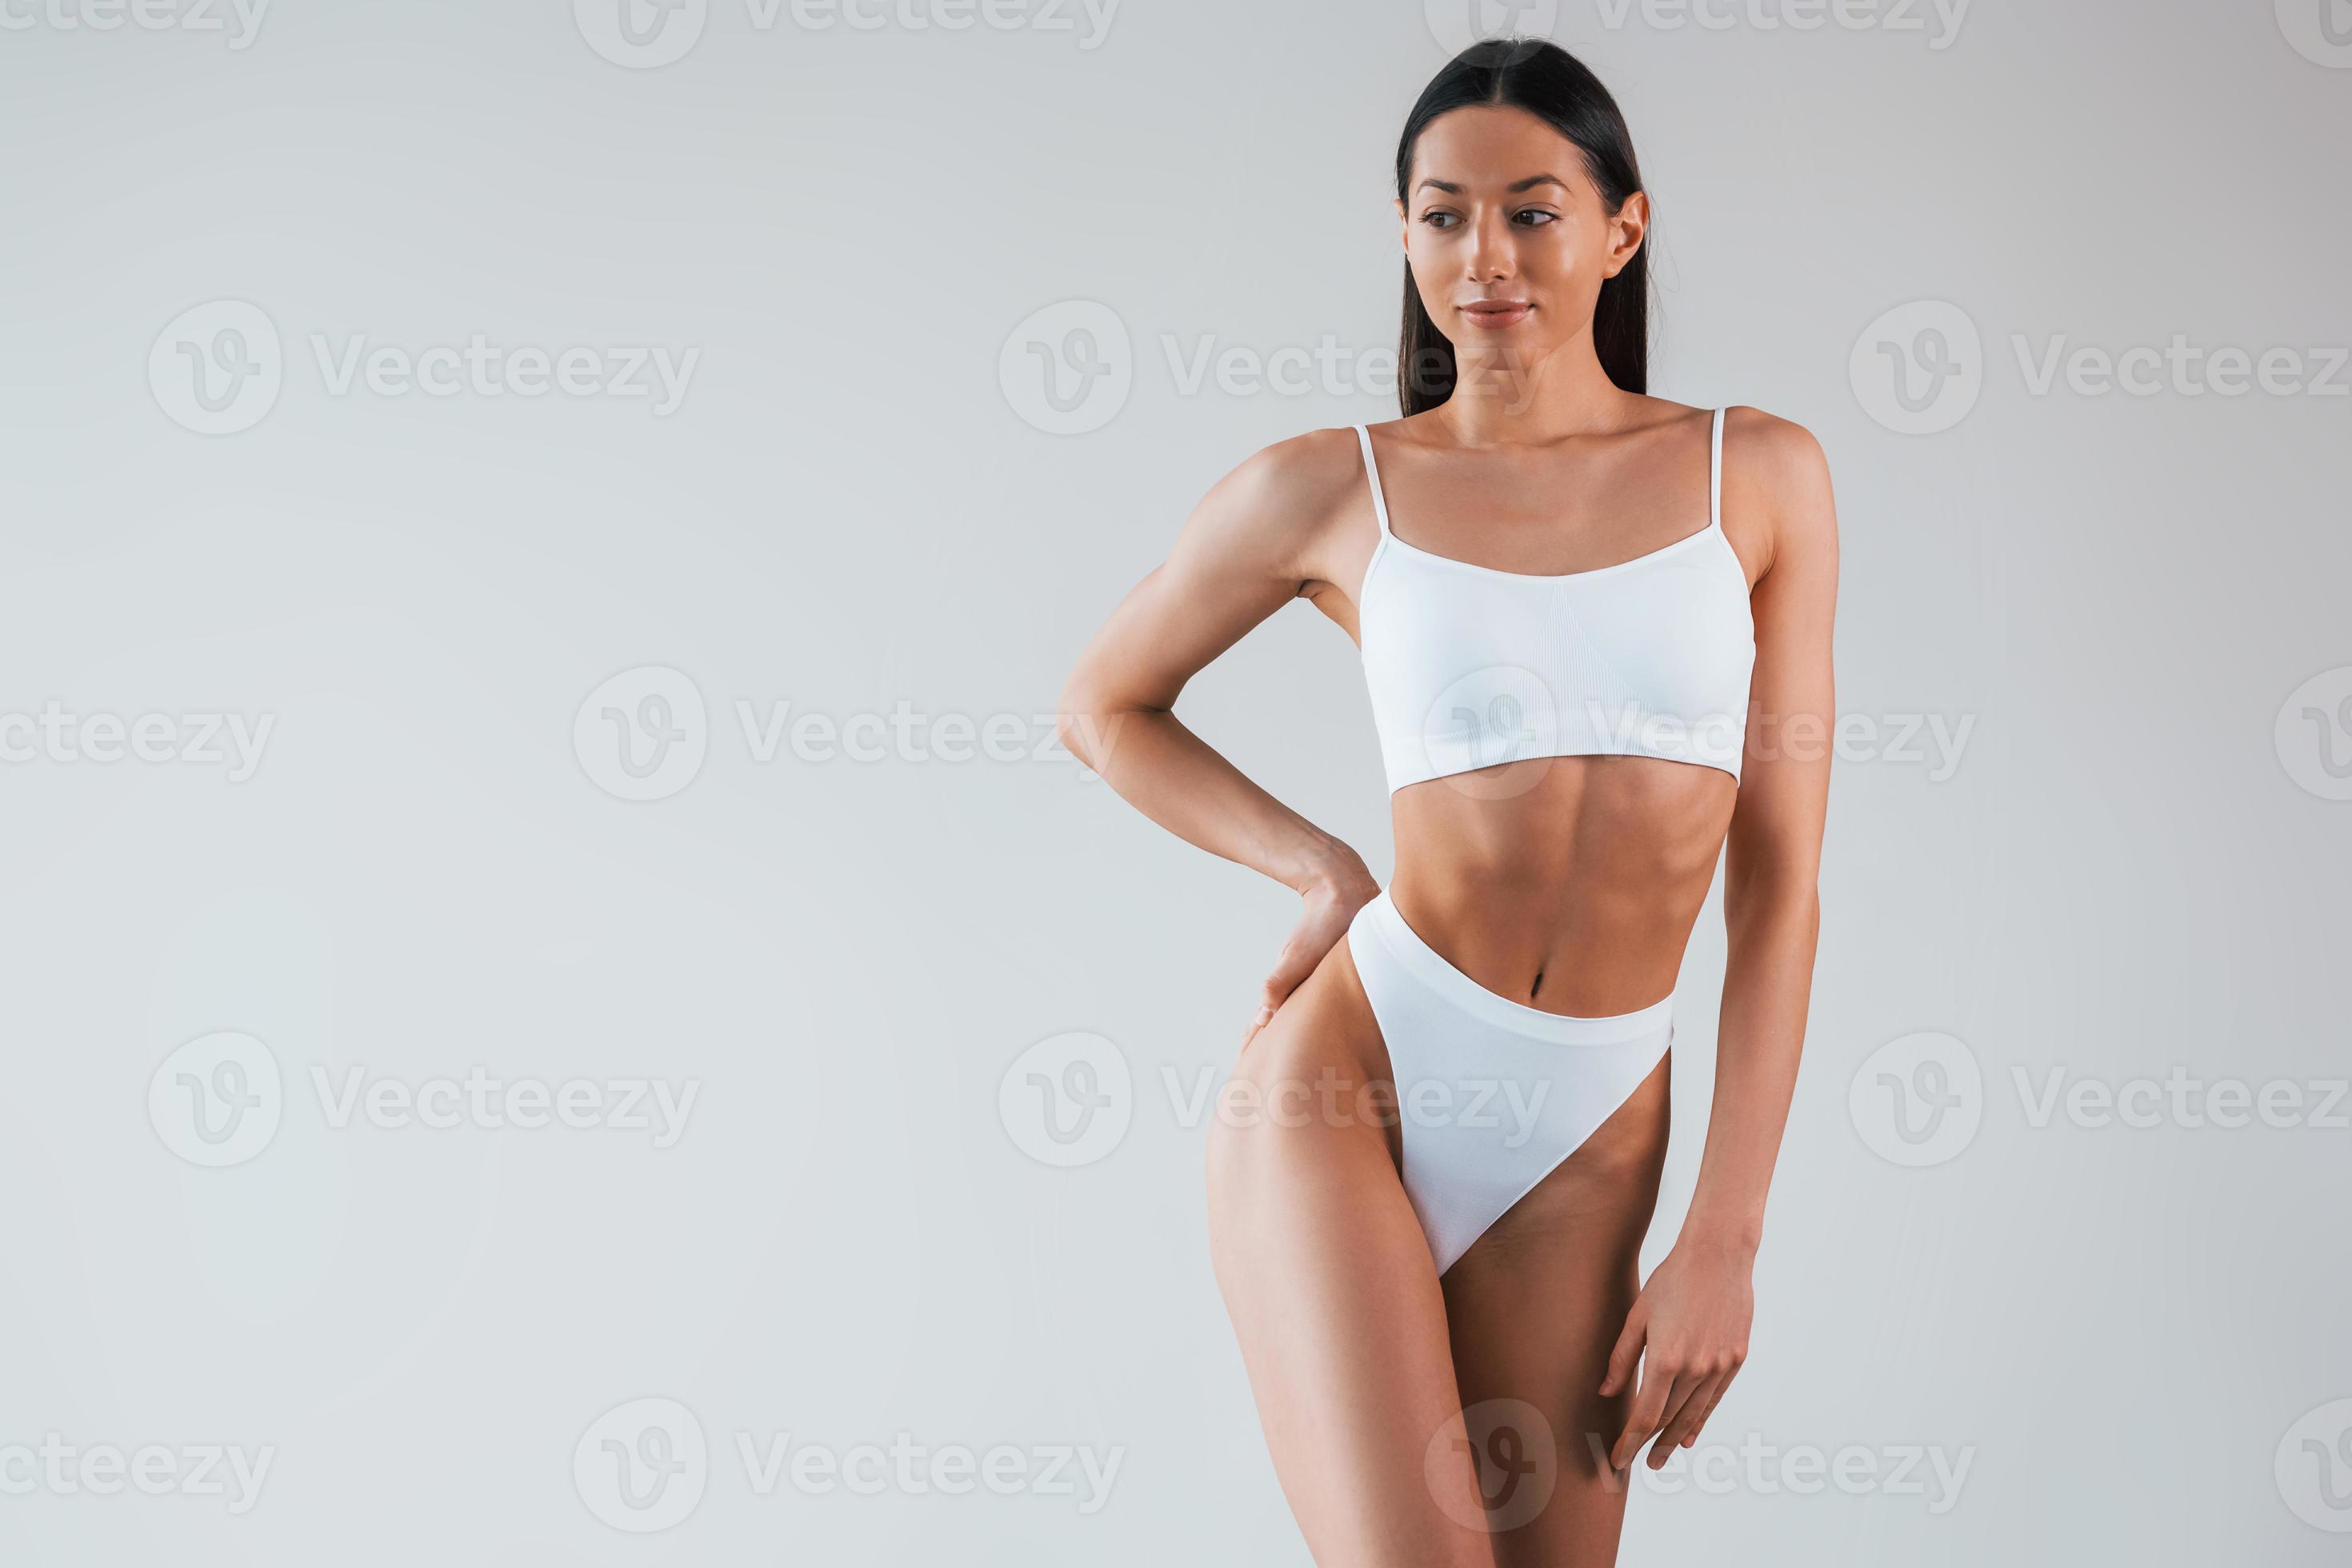 In white underwear. Woman with sportive slim body type that is in the  studio 15303633 Stock Photo at Vecteezy